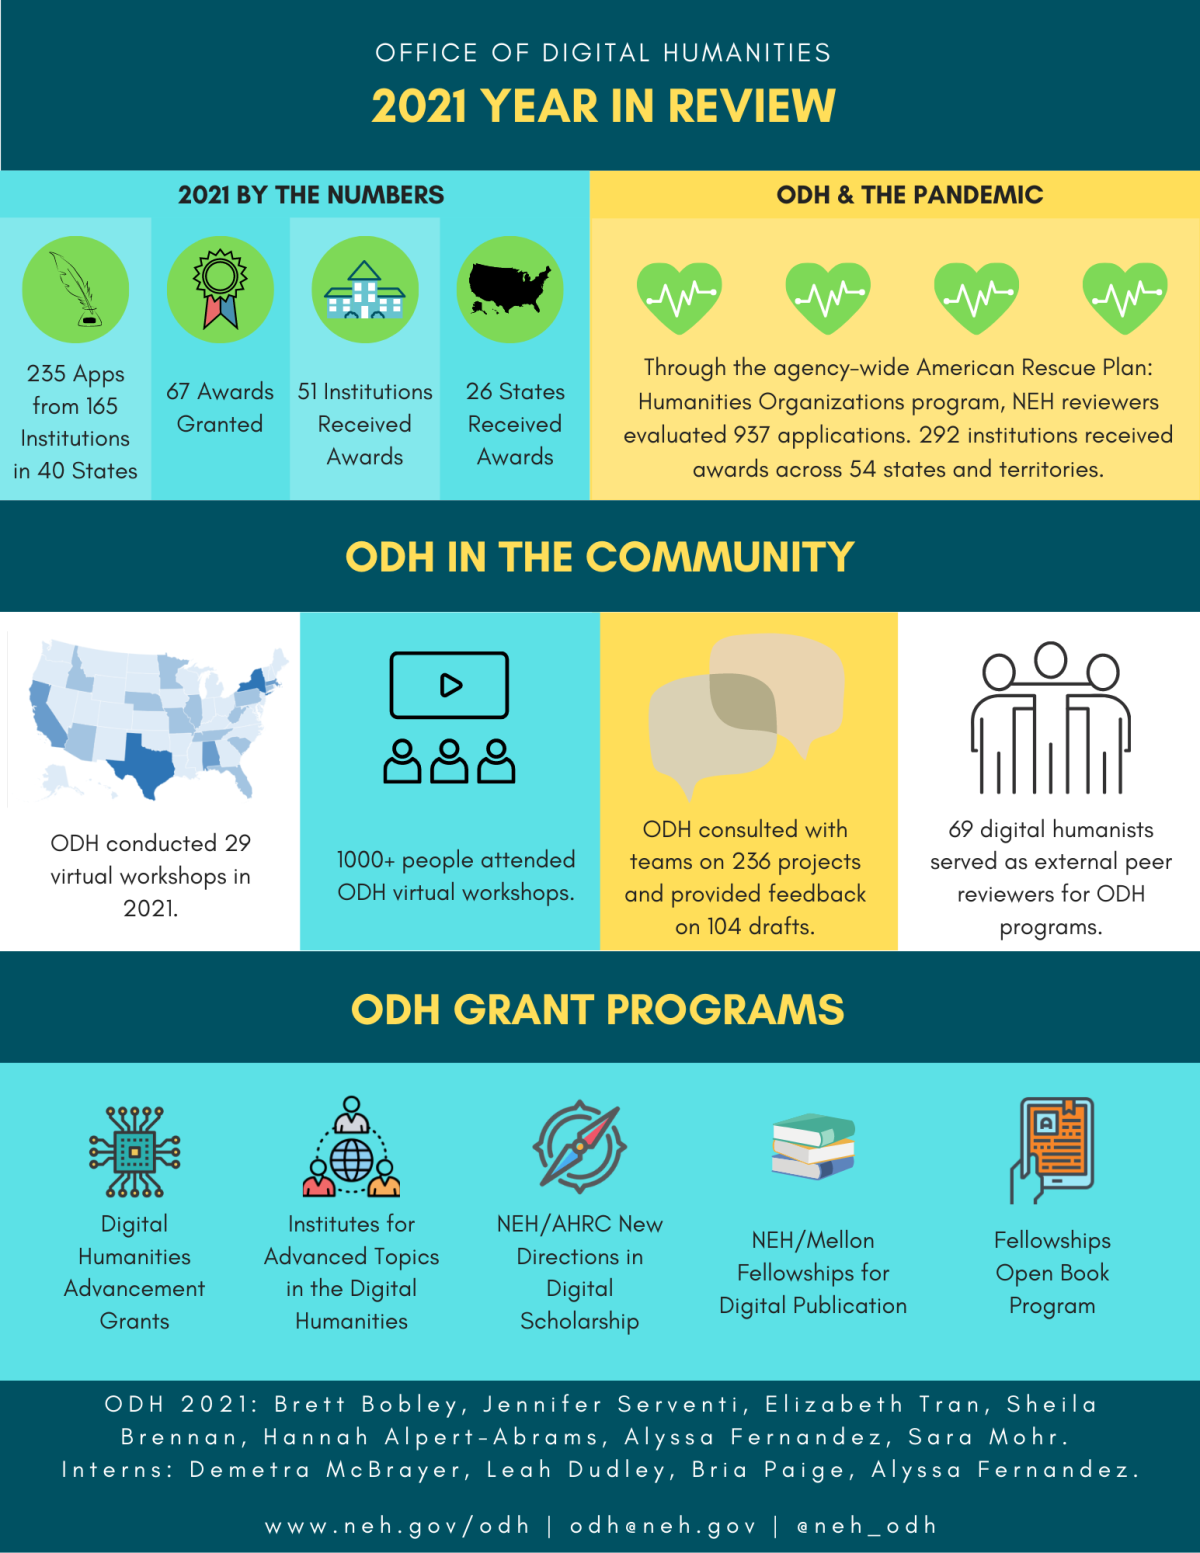 Infographic summarizing the numbers described in the blog post, including awards, outreach activities, and grant programs.